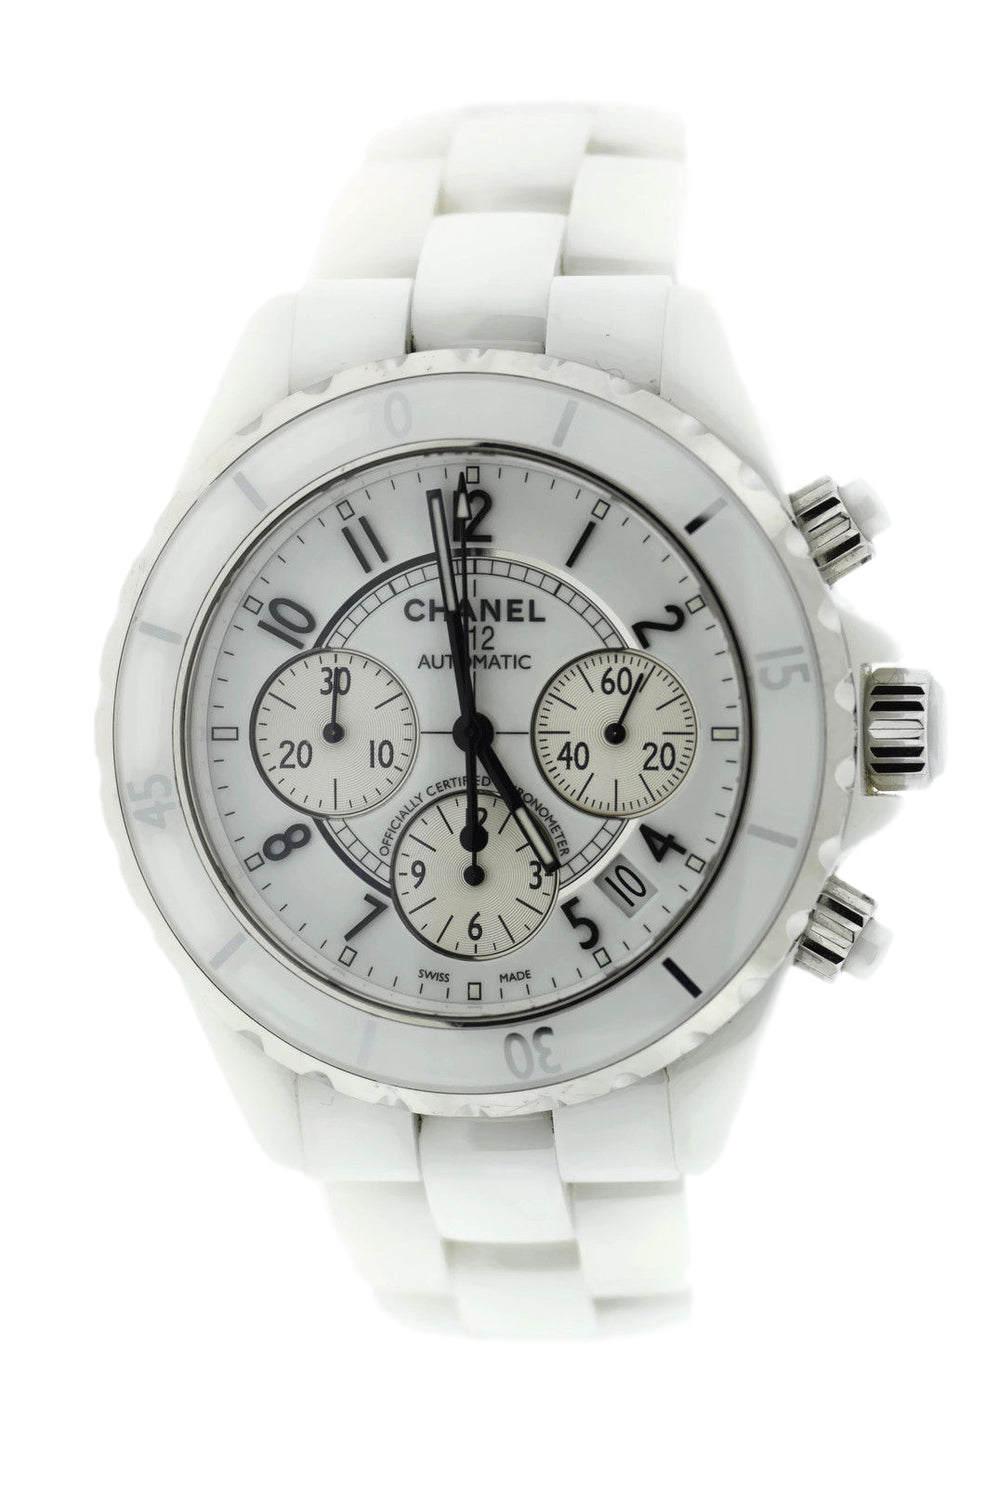 Authentic Used Chanel J12 Chronograph H1007 Watch (10-20-CHN-7BXV6E)